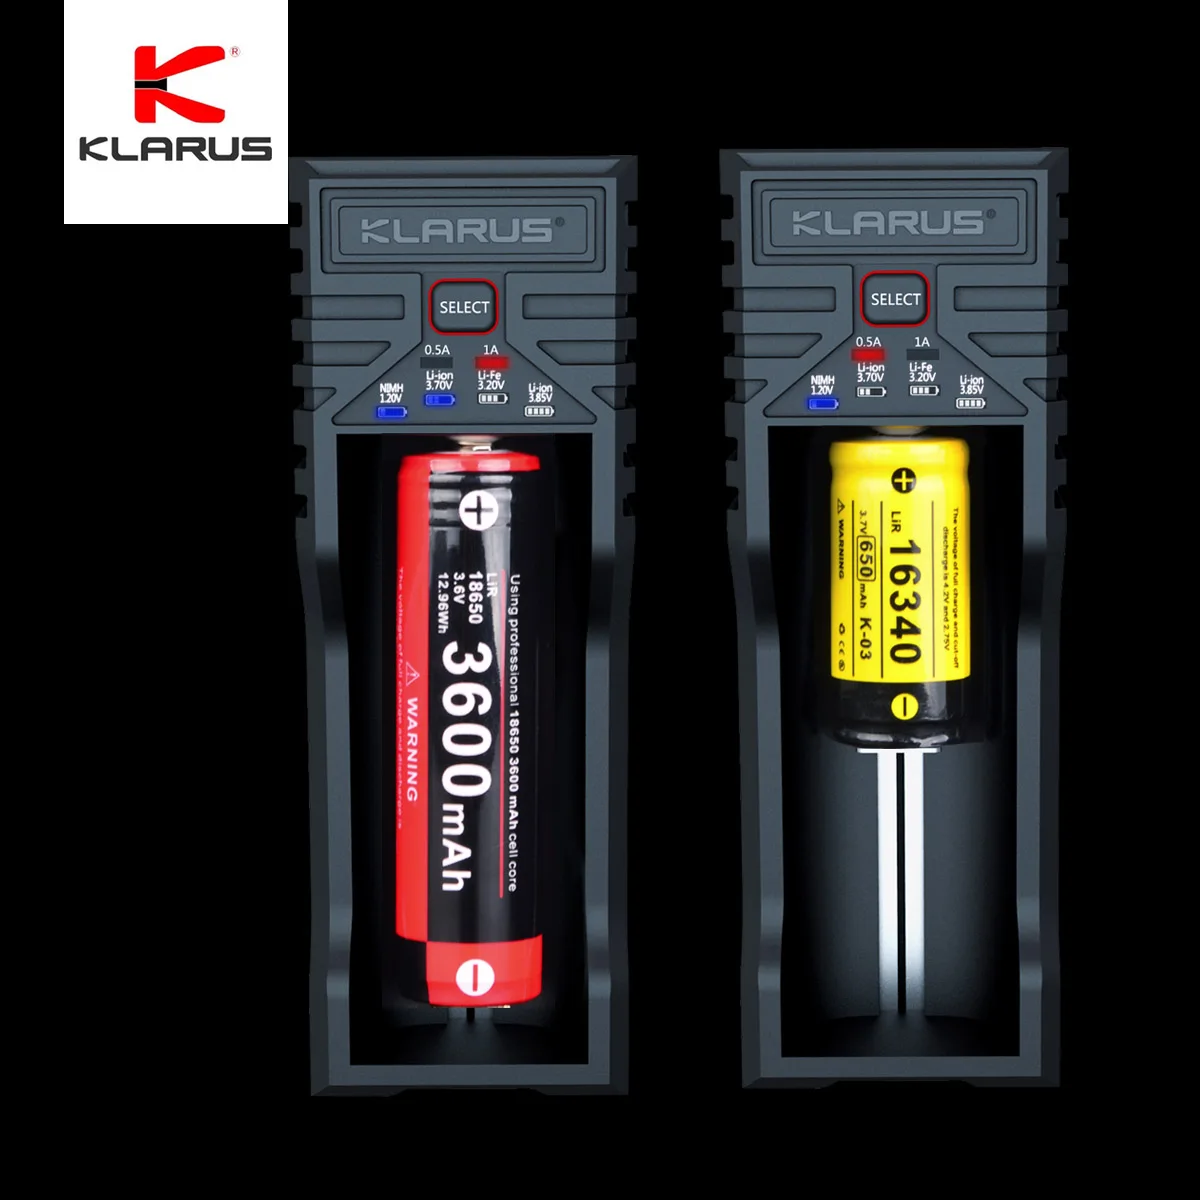 Klarus Original Flashlight USB Smart Charger K1, Capable of Charging Almost All Rechargeable Batteries